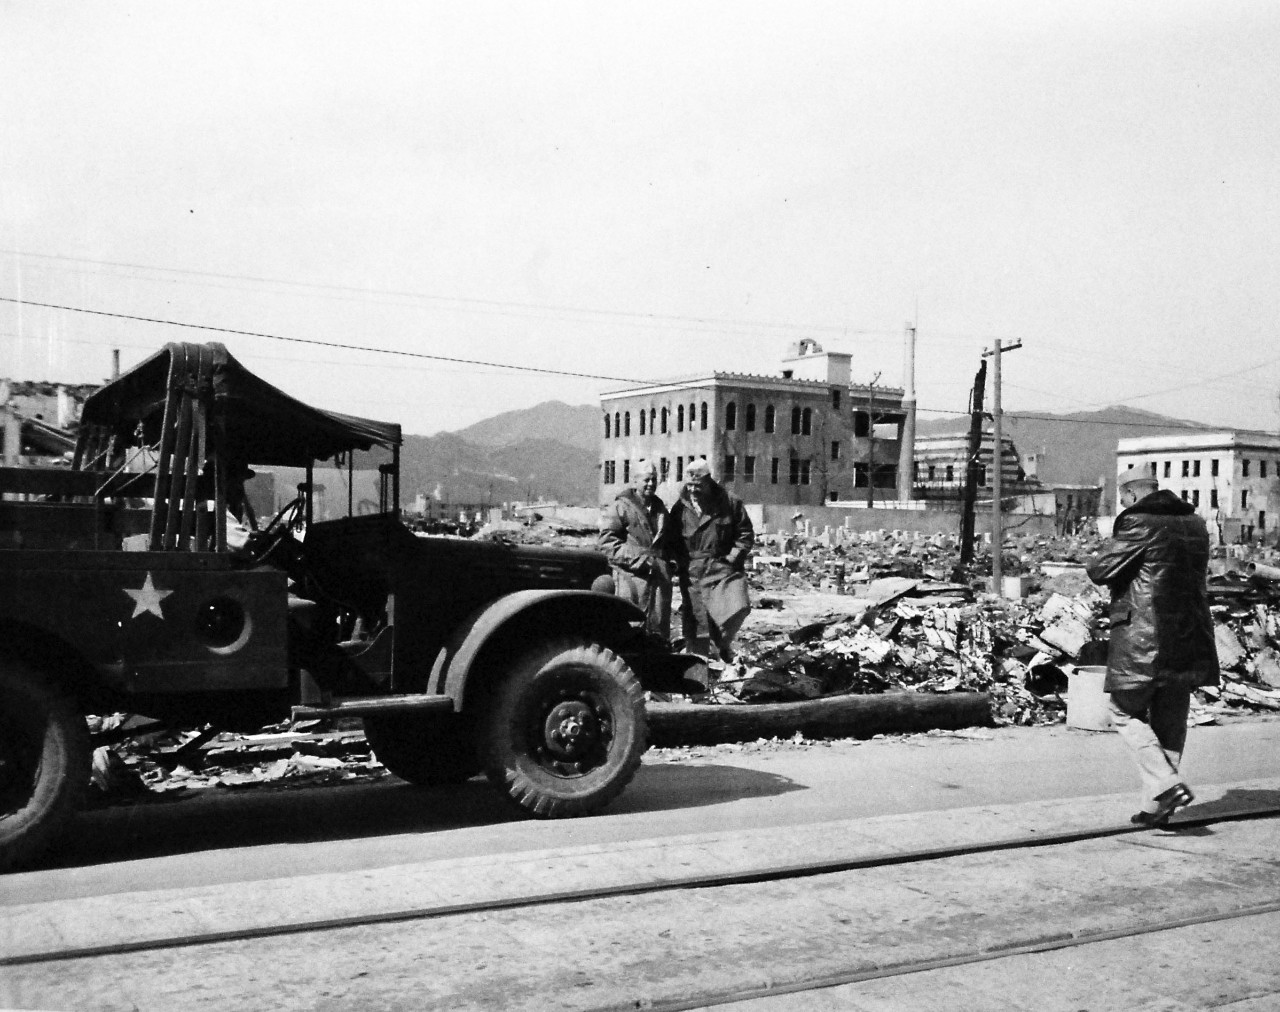 80-G-354615:  Hiroshima, Japan, 1945.   Atomic Bomb Damage to Hiroshima, as seen by USS Appalachian (AGC-1).   Captain J. B. Renn and Lieutenant Shelley of USS Appalachian (AGC-1) at Hiroshima. Photographed by PhoM3/C George Almarez.  Photographed received October 26, 1945.    U.S. Navy photograph, now in the collections of the National Archives.  (2016/06/21).